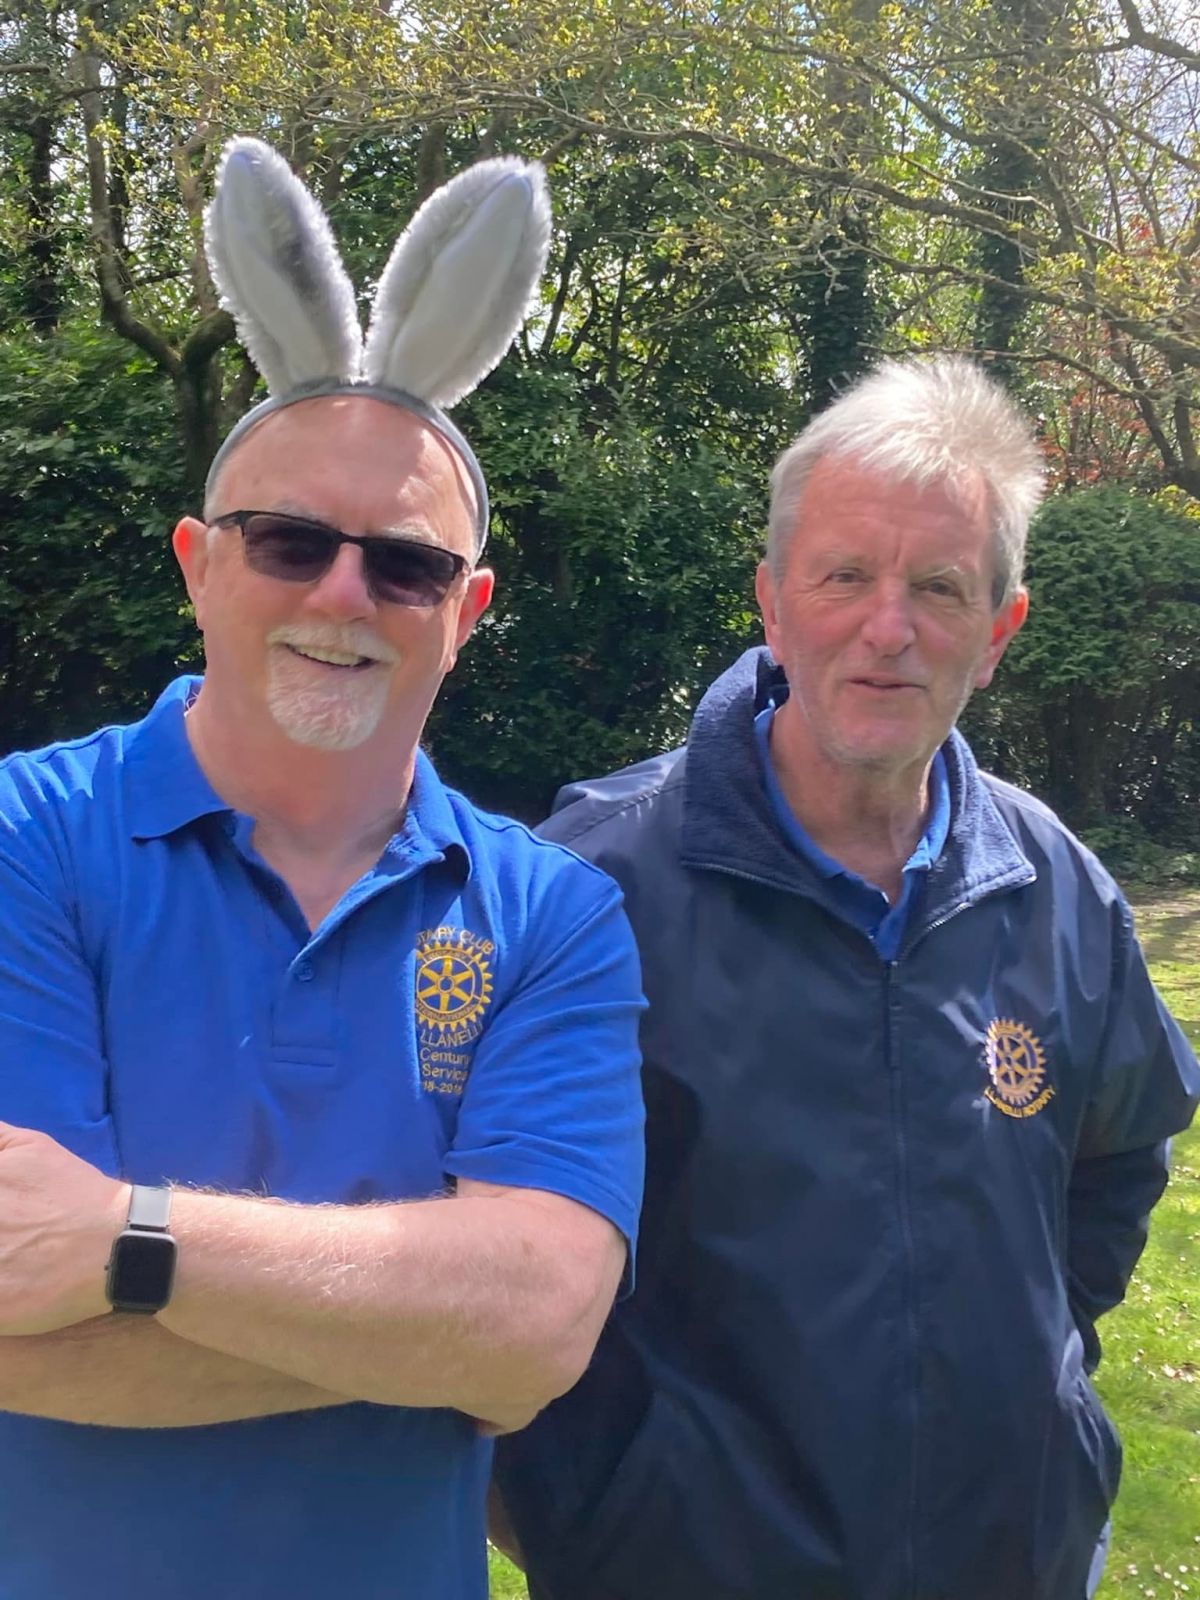 Egg-citing time as Llanelli Rotary stages hunt - 